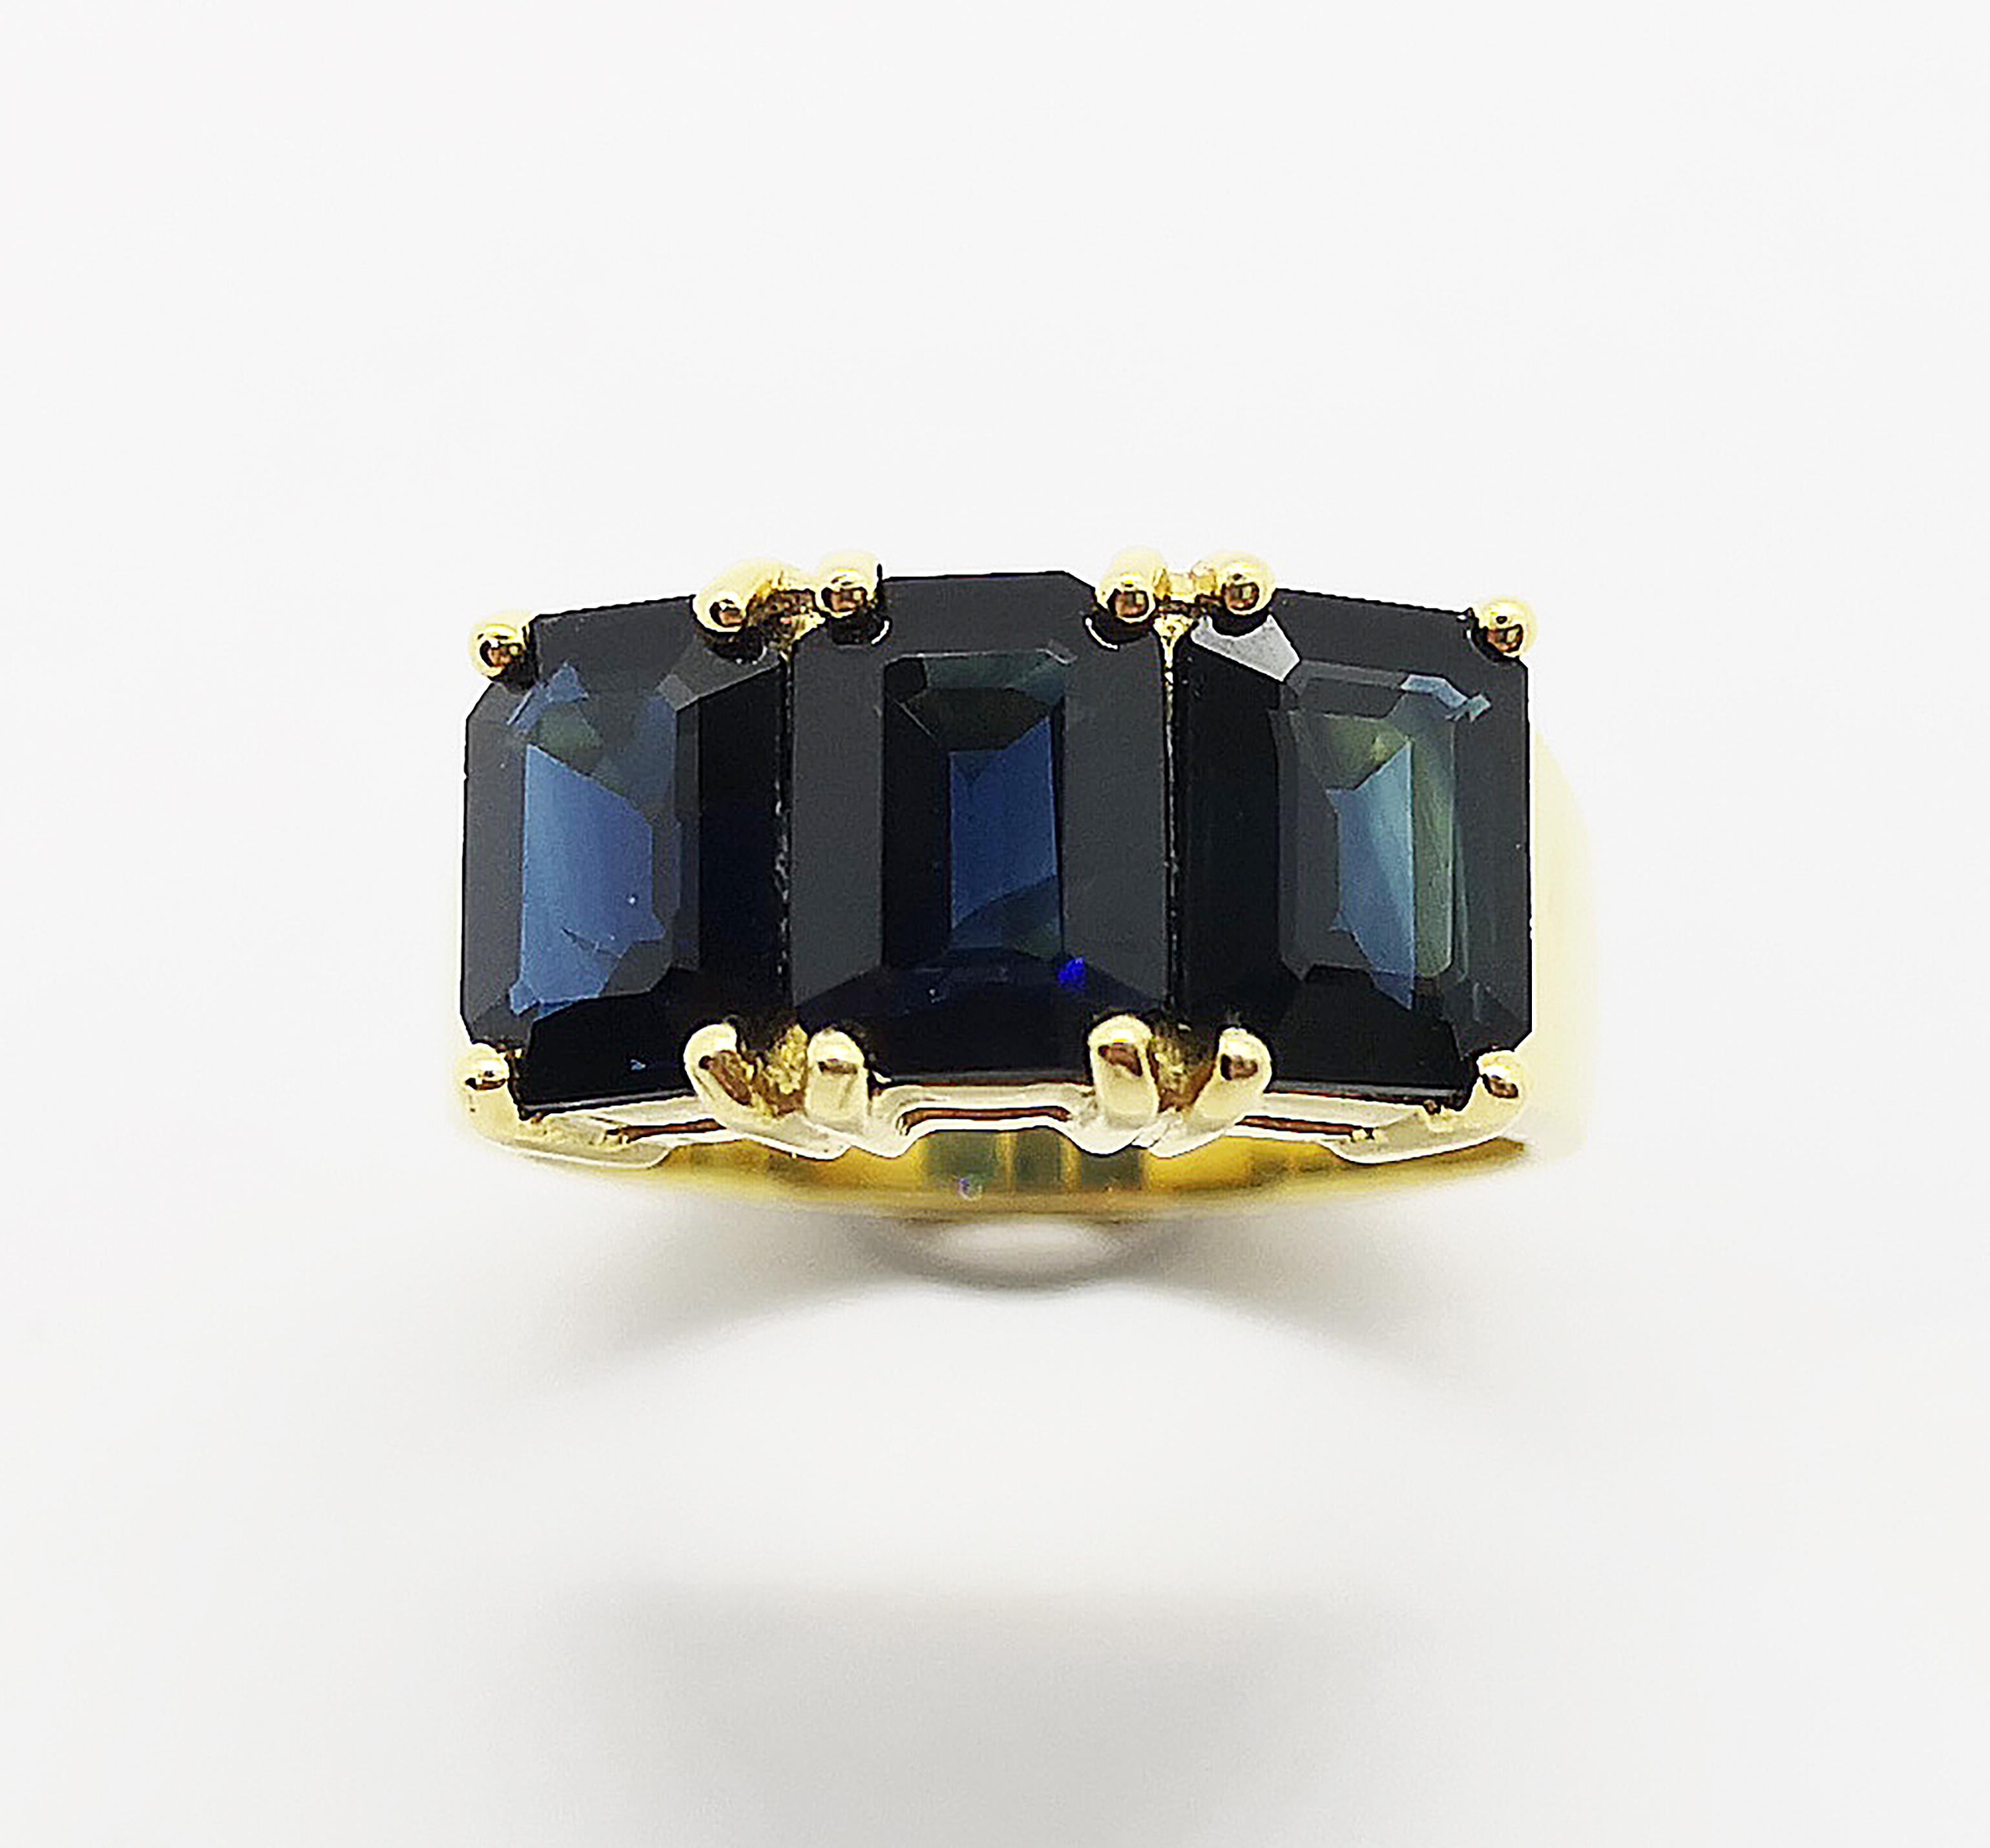 Blue Sapphire 4.83 carats Ring set in 18 Karat Gold Settings

Width:  1.6 cm 
Length: 0.8 cm
Ring Size: 52
Total Weight: 8.33 grams

